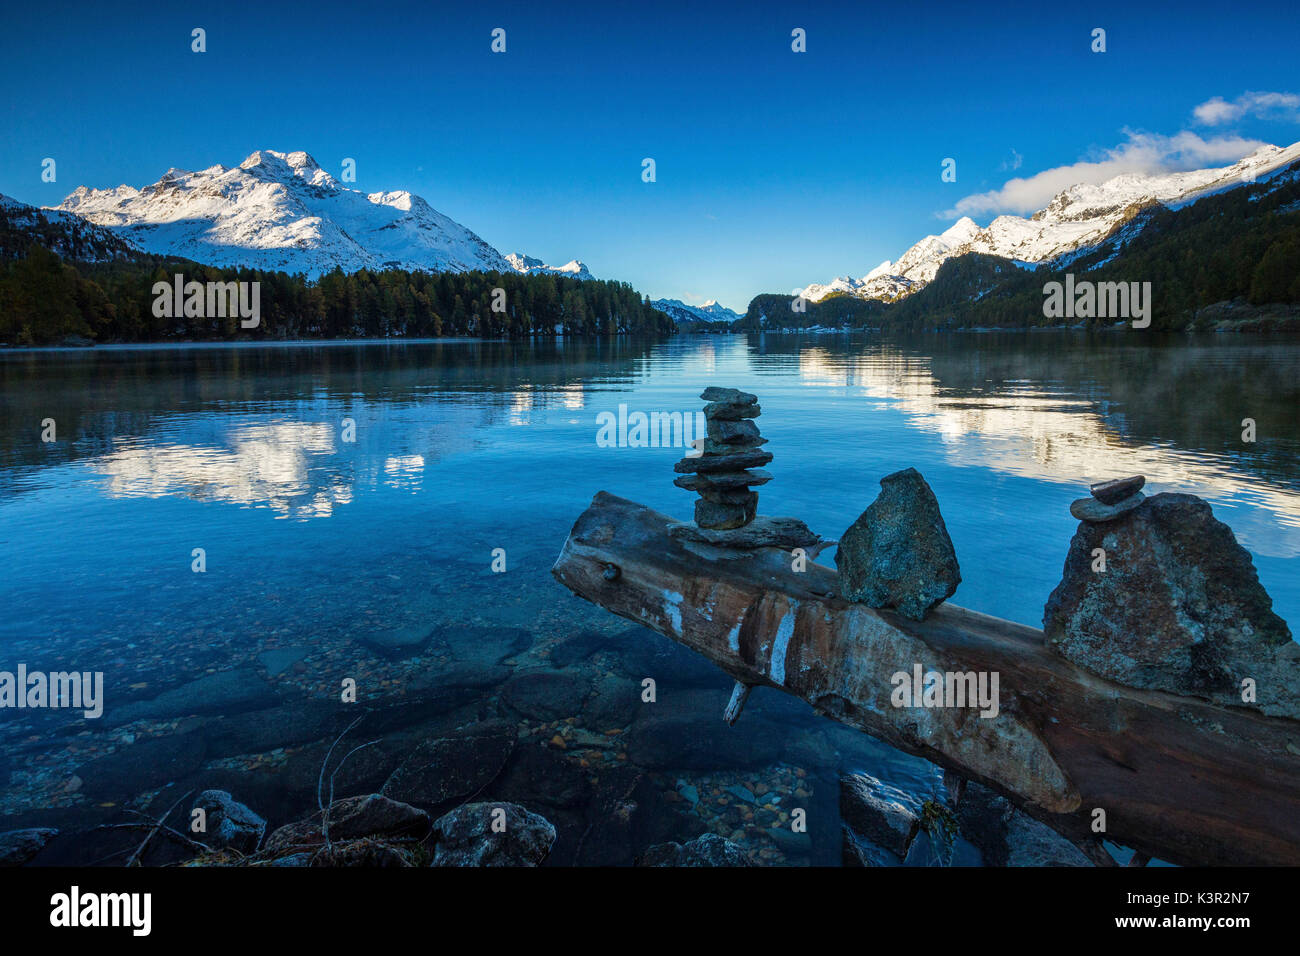 Dawn illuminates the peaks reflected in the calm waters of Lake Sils Engadine Canton of Graubünden Switzerland Europe Stock Photo